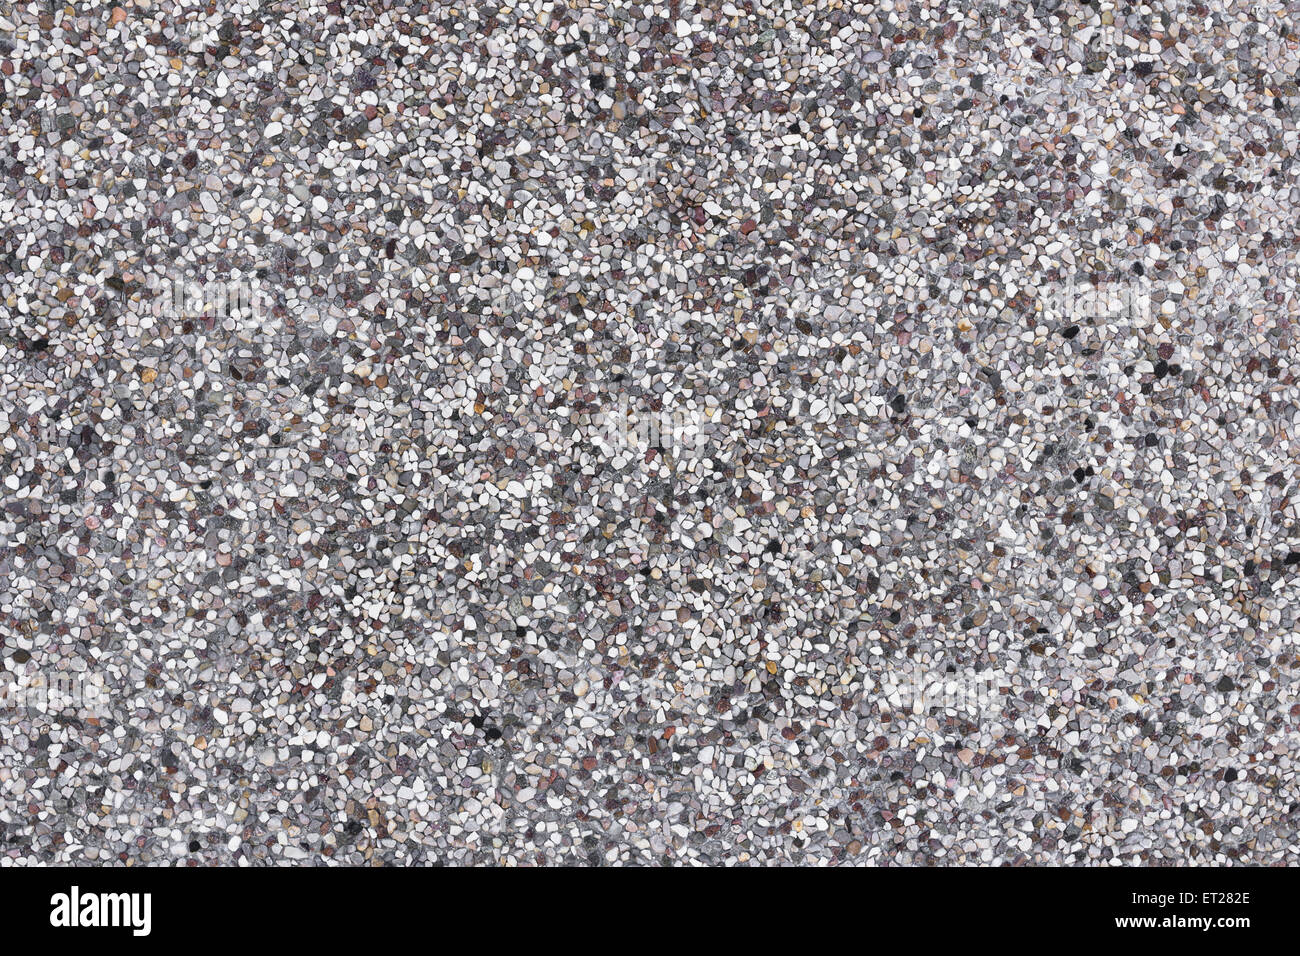 Backdrop composed of tiny white pebbles, grays and browns. Stock Photo